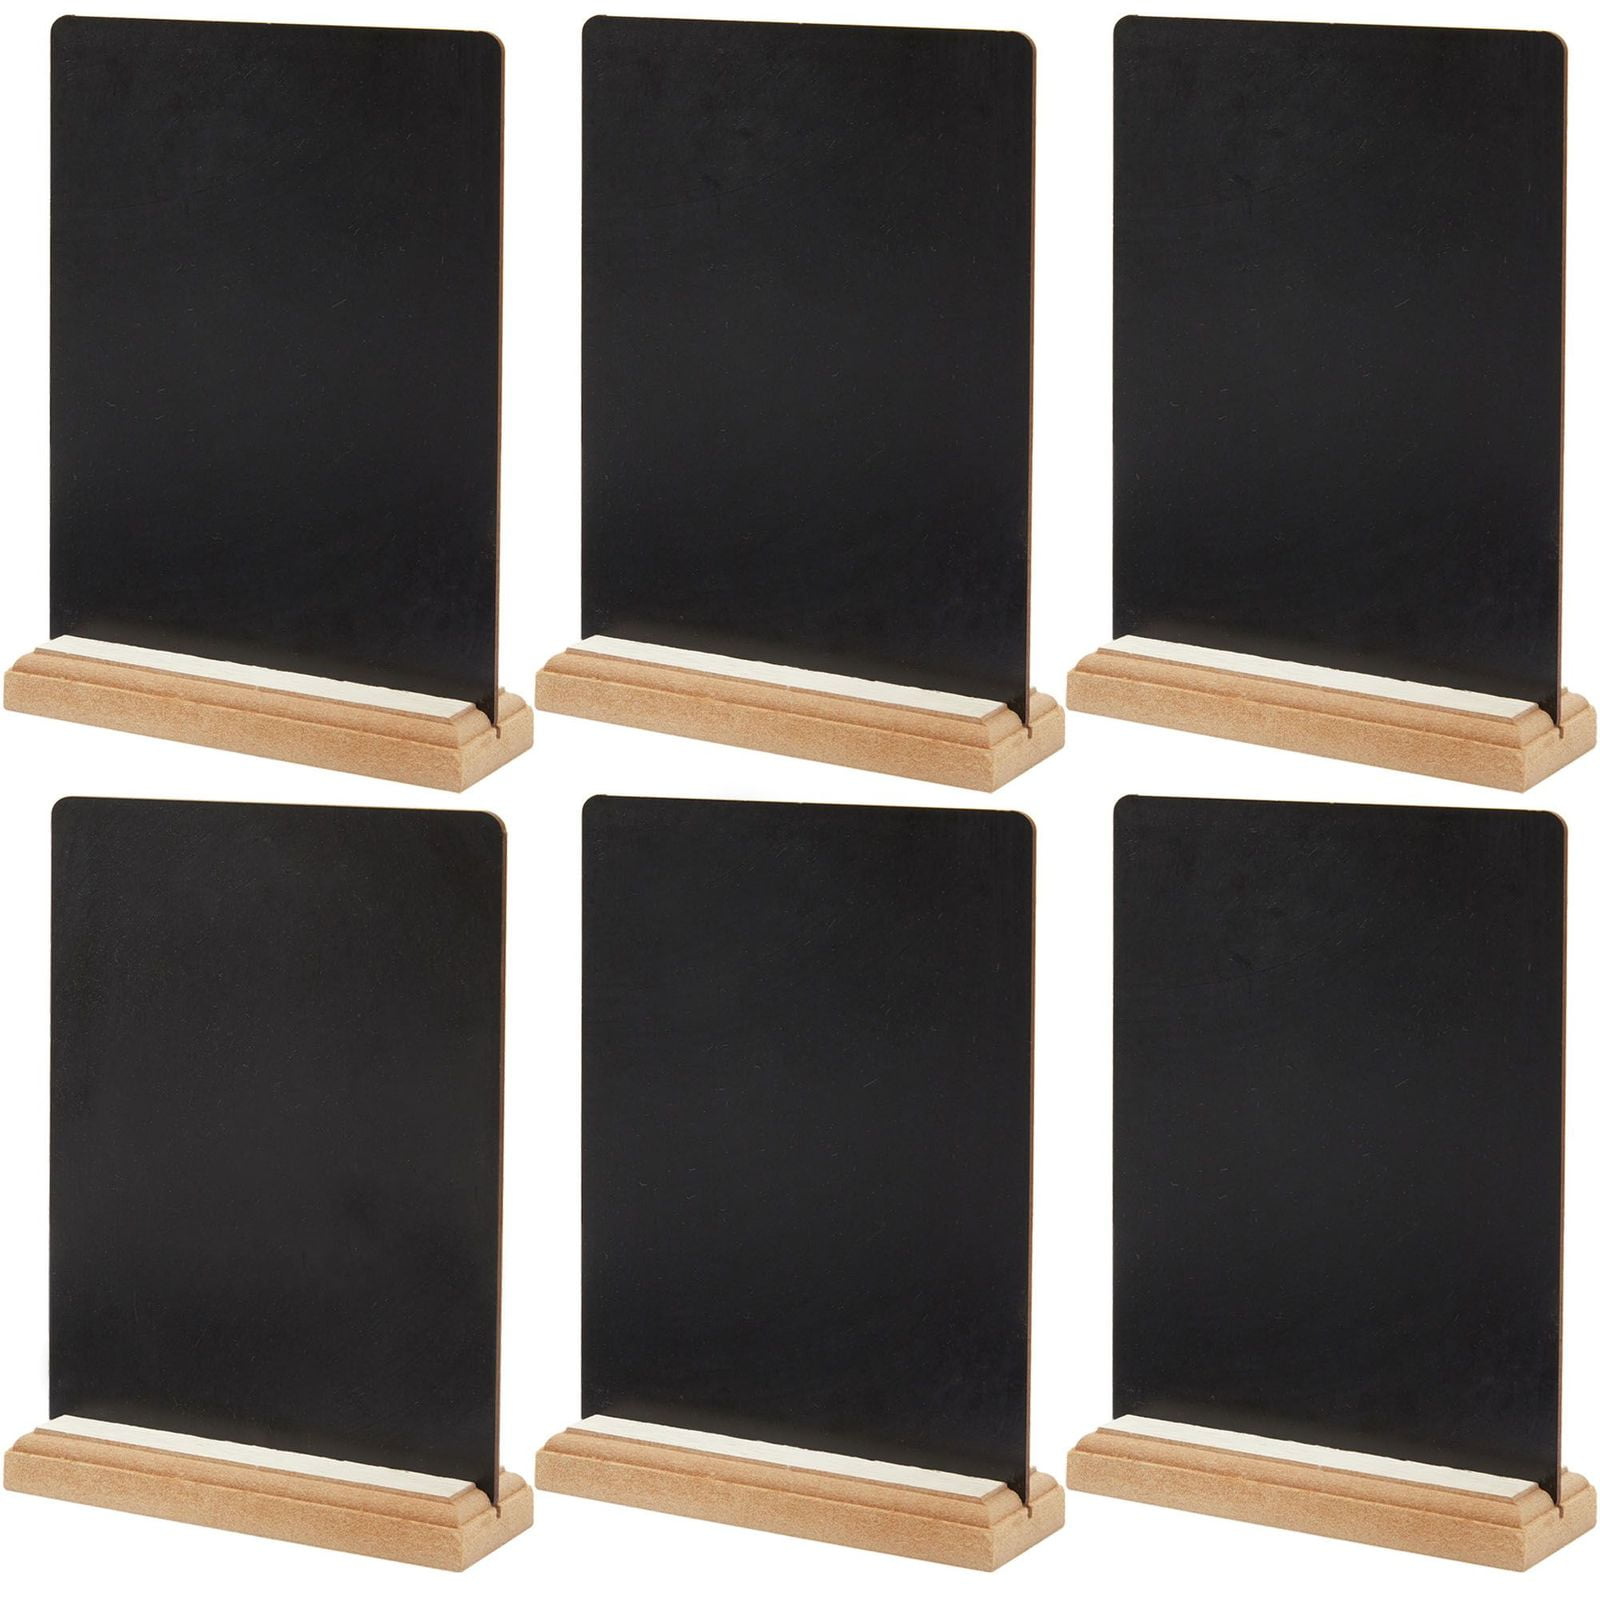 Pack-10 Mini Blackboards Black Boards Memo Message Signs Chalkboards with 